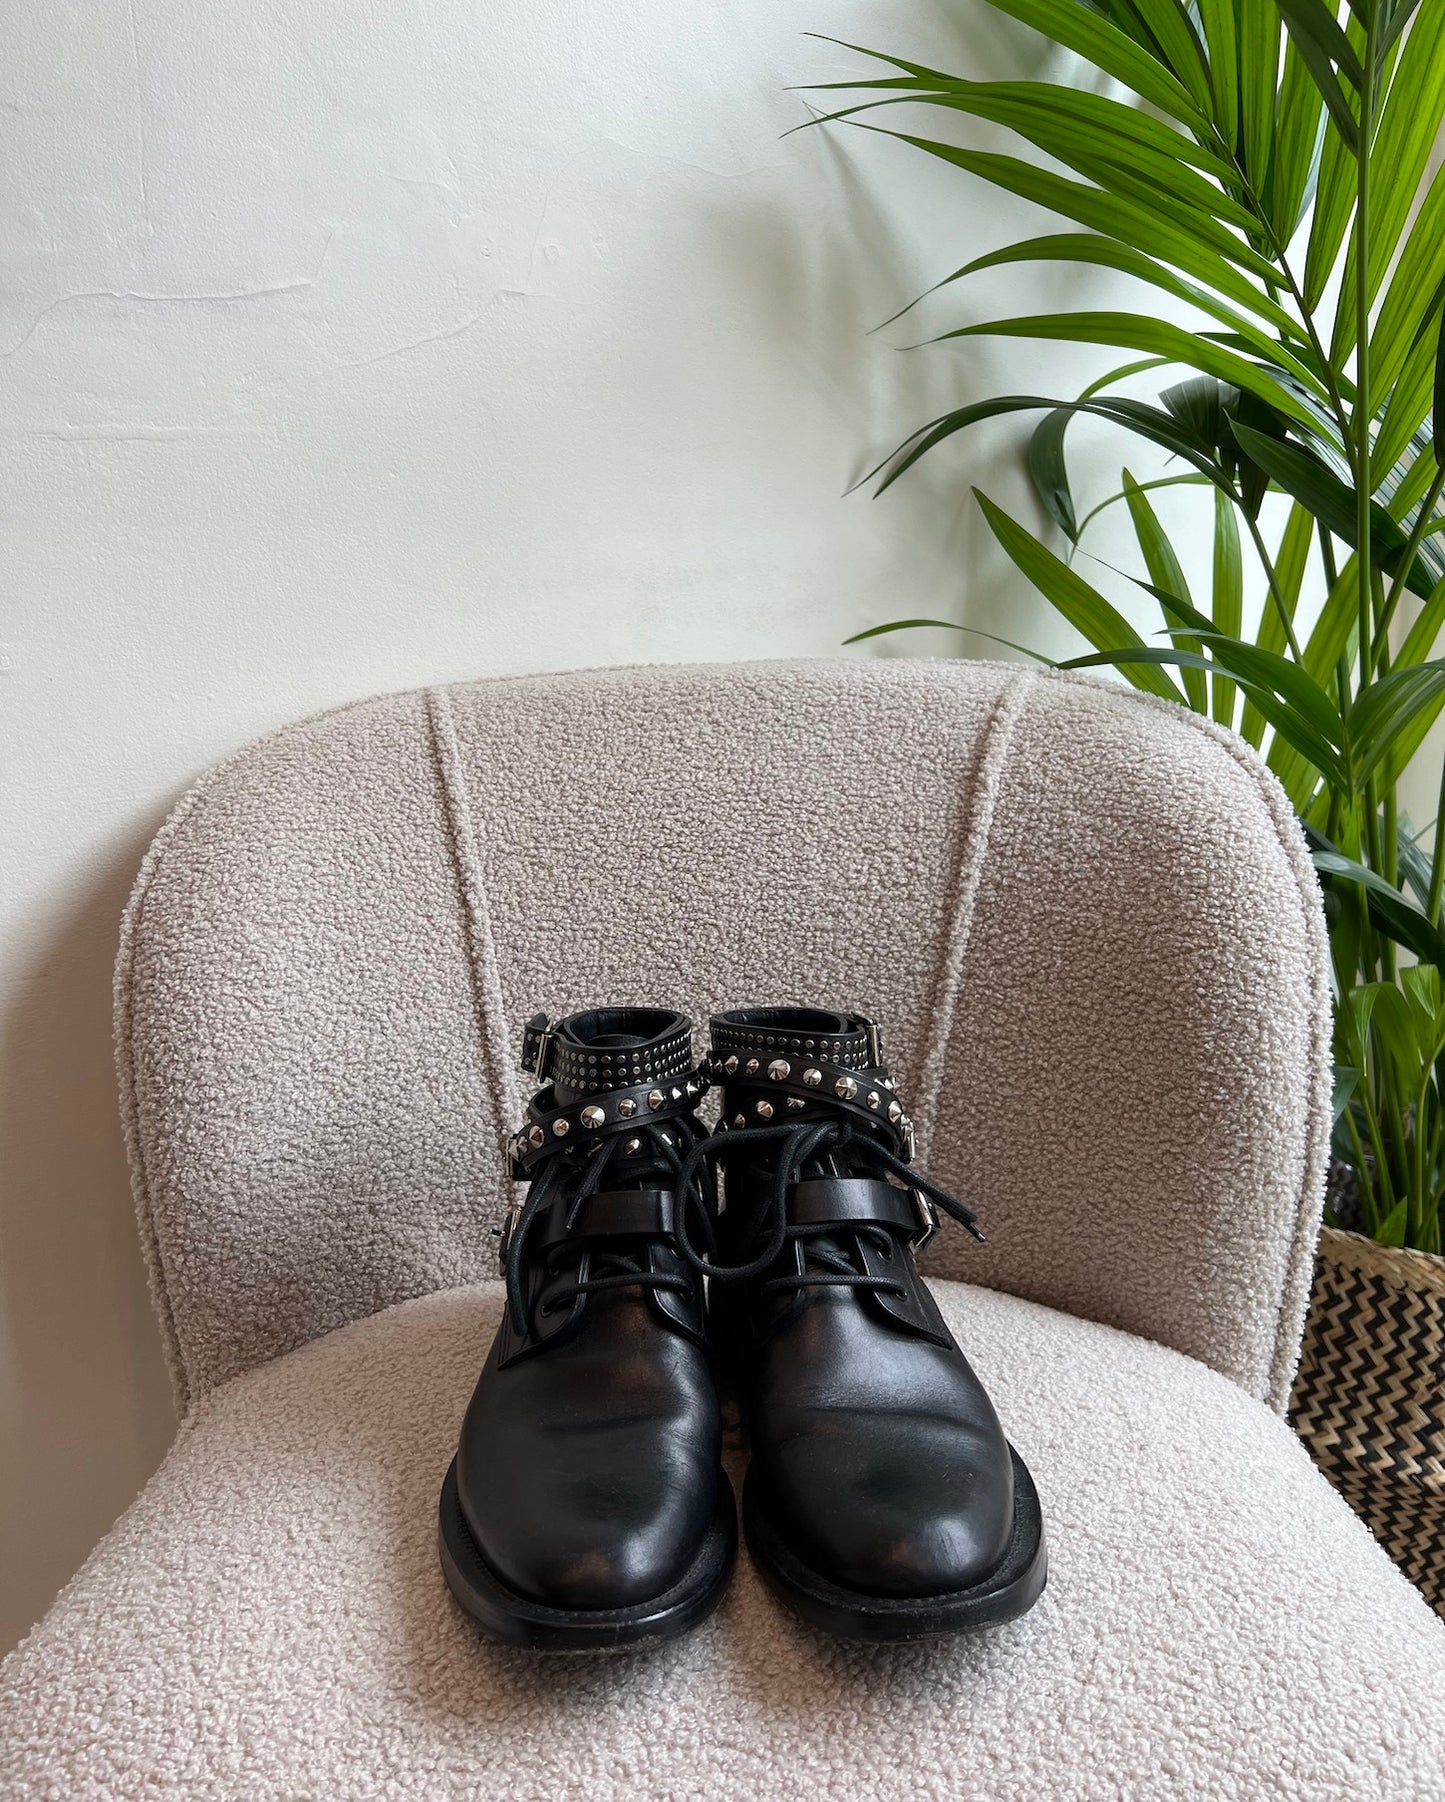 SALE - Black Lace-Up Boots With Studded Ankle Straps ~ Size 7